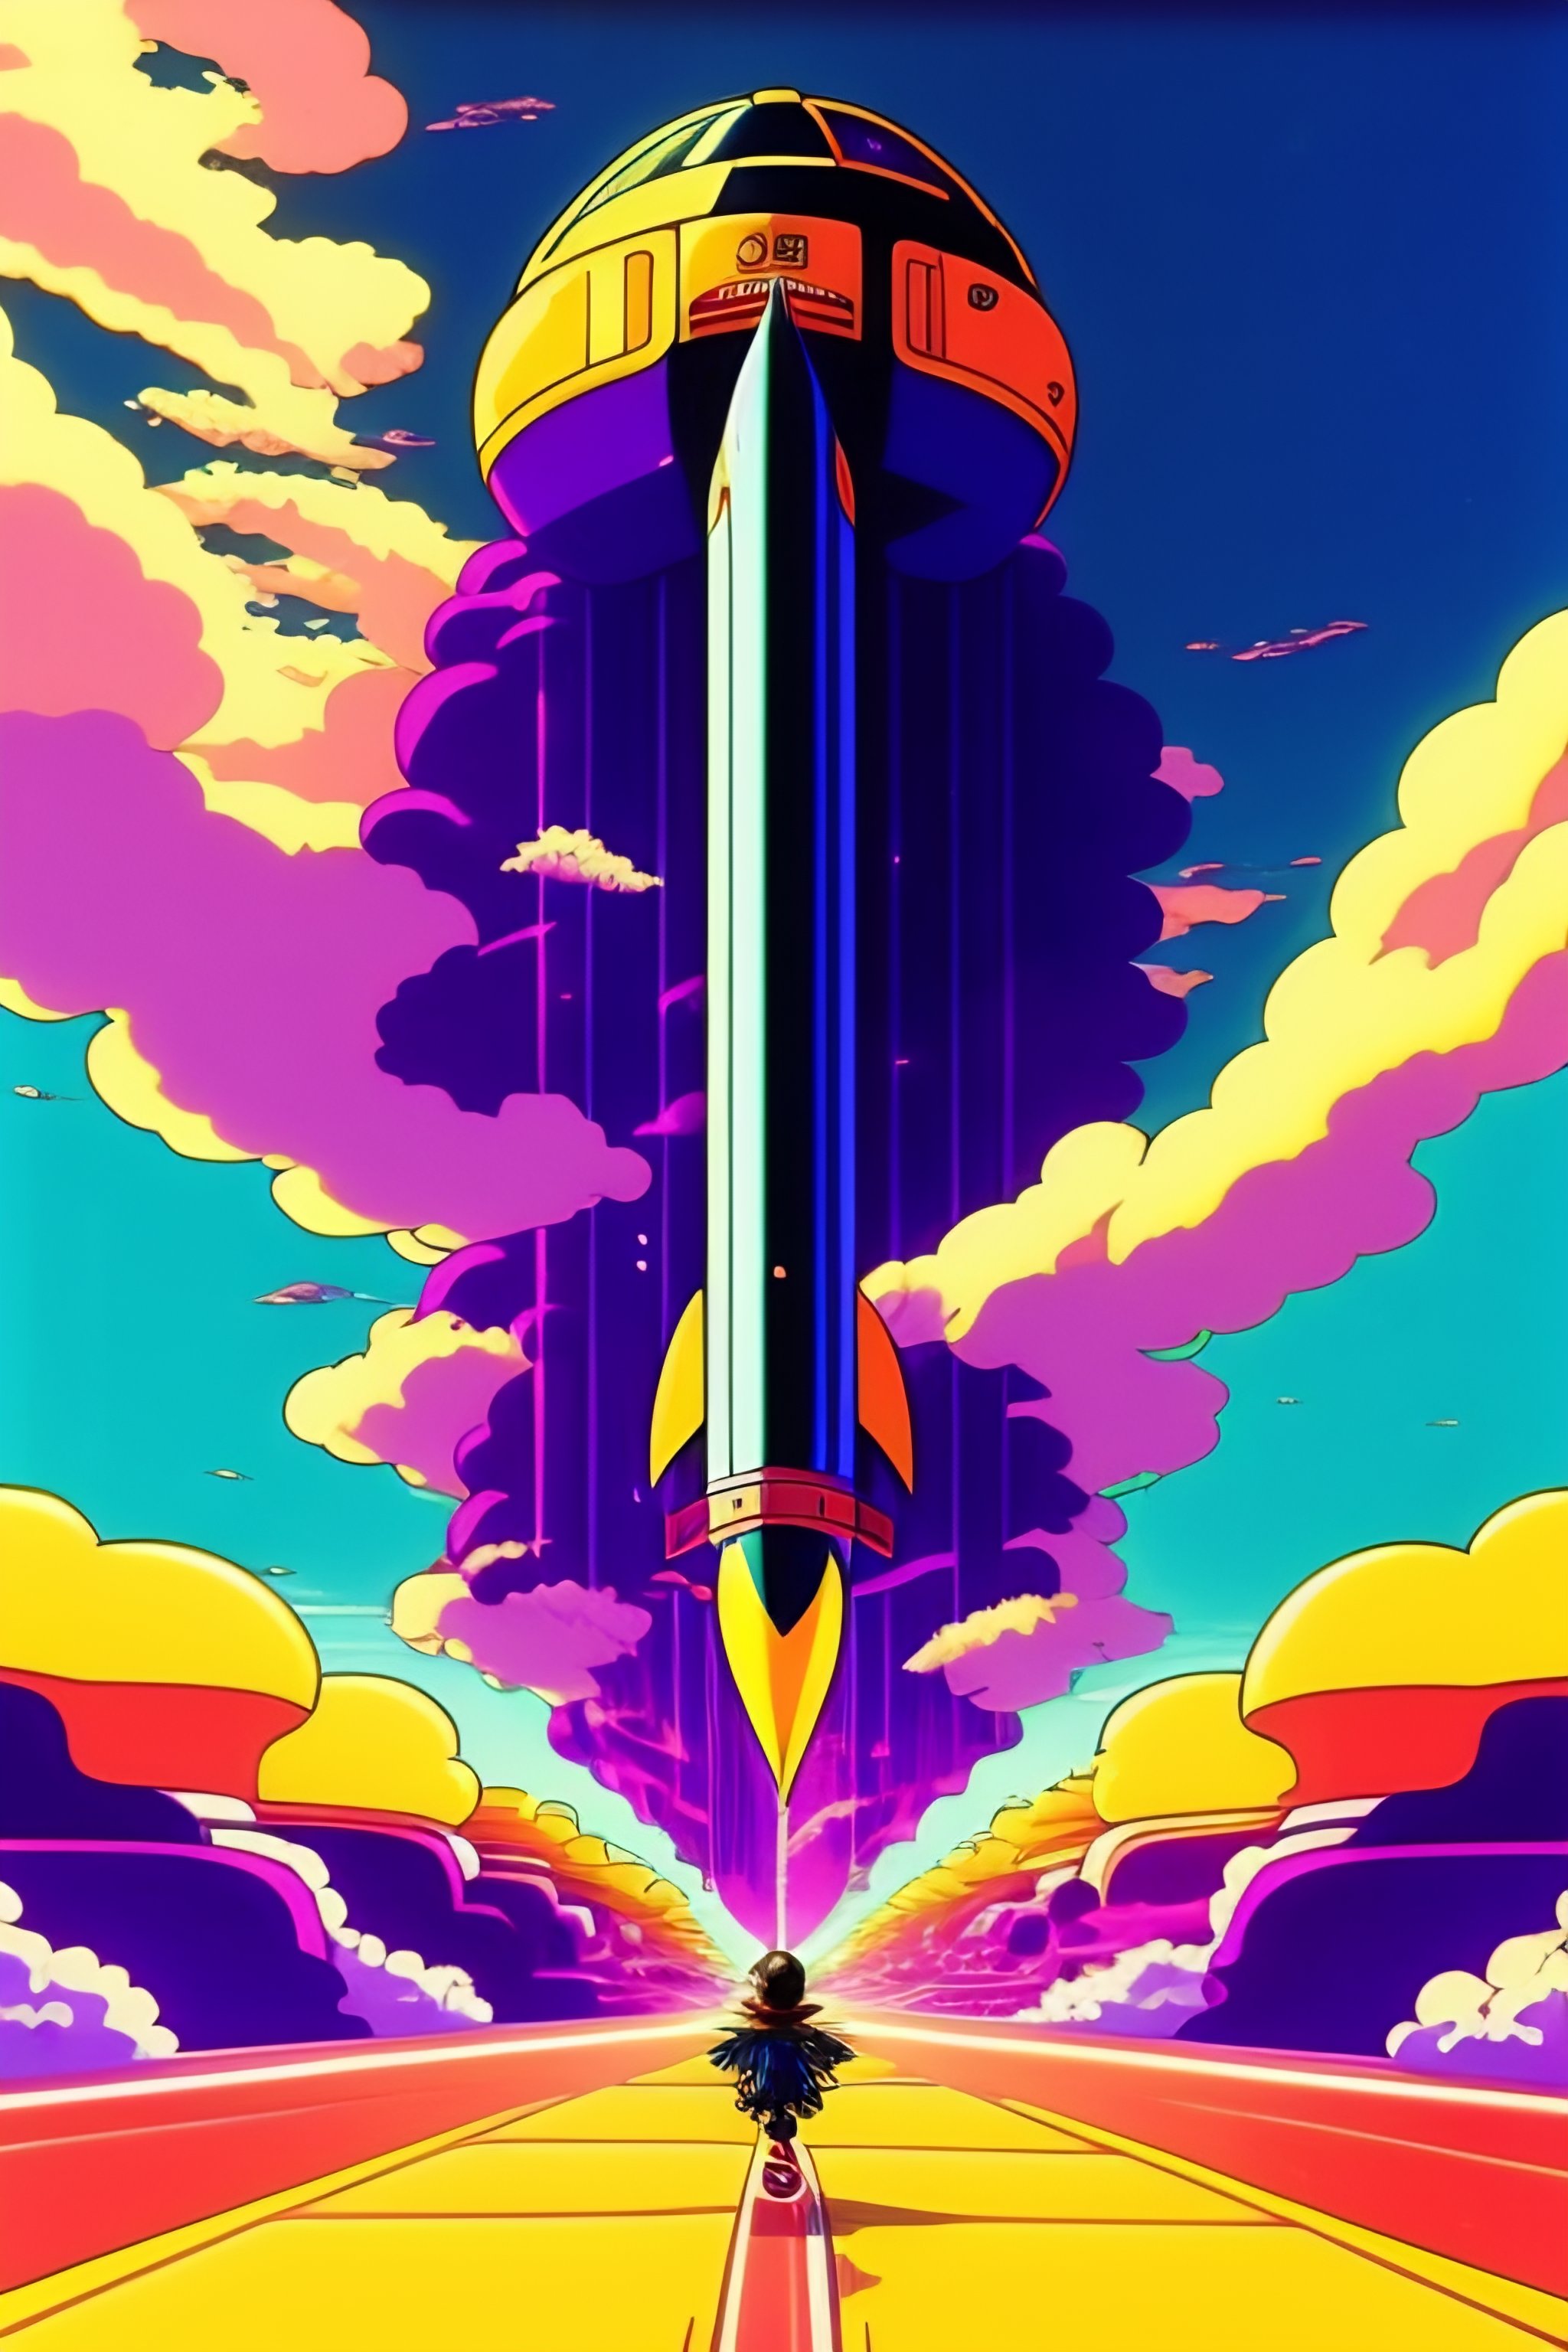 Lexica - Vintage anime, 90's anime aesthetic. A stunning maximalist shot  the protagonist running towards a rocket ship taking off. Aesthetic. One  poi...